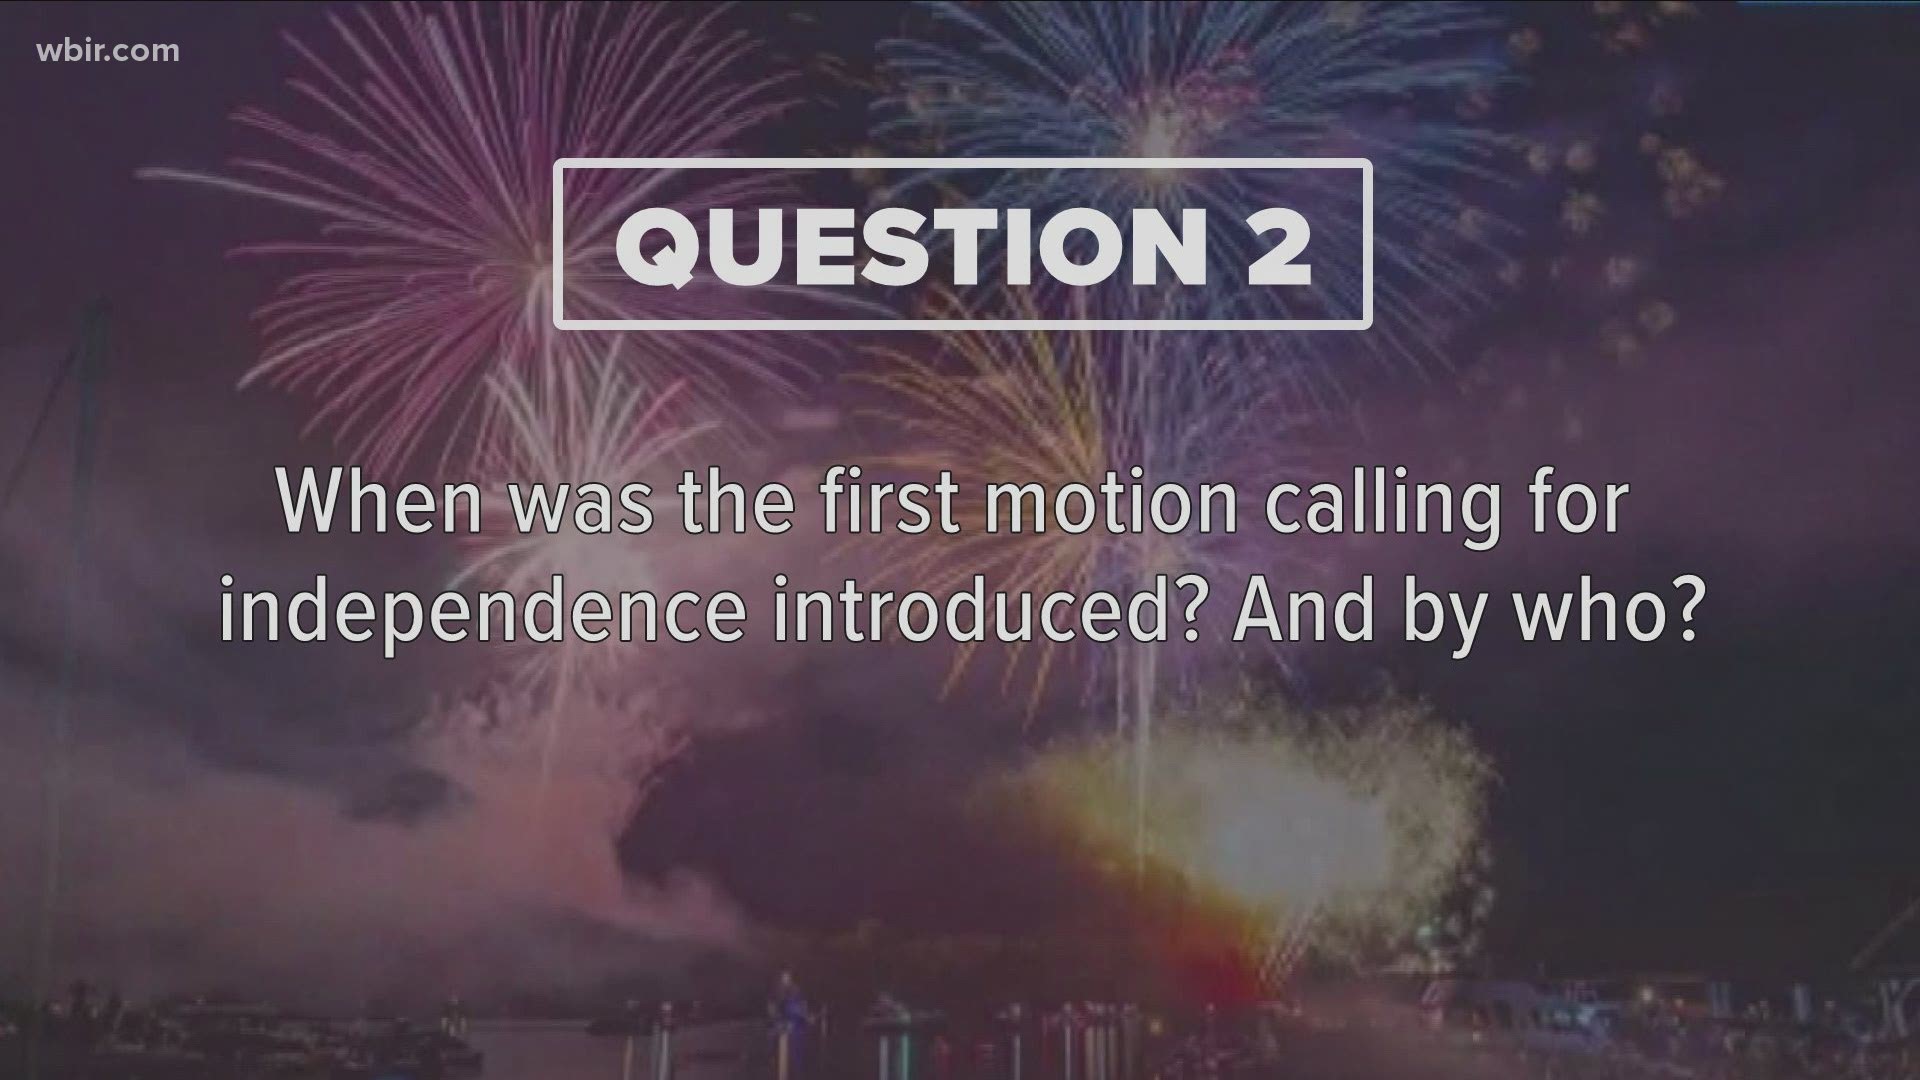 Put your history knowledge to the test in our Independence Day trivia!